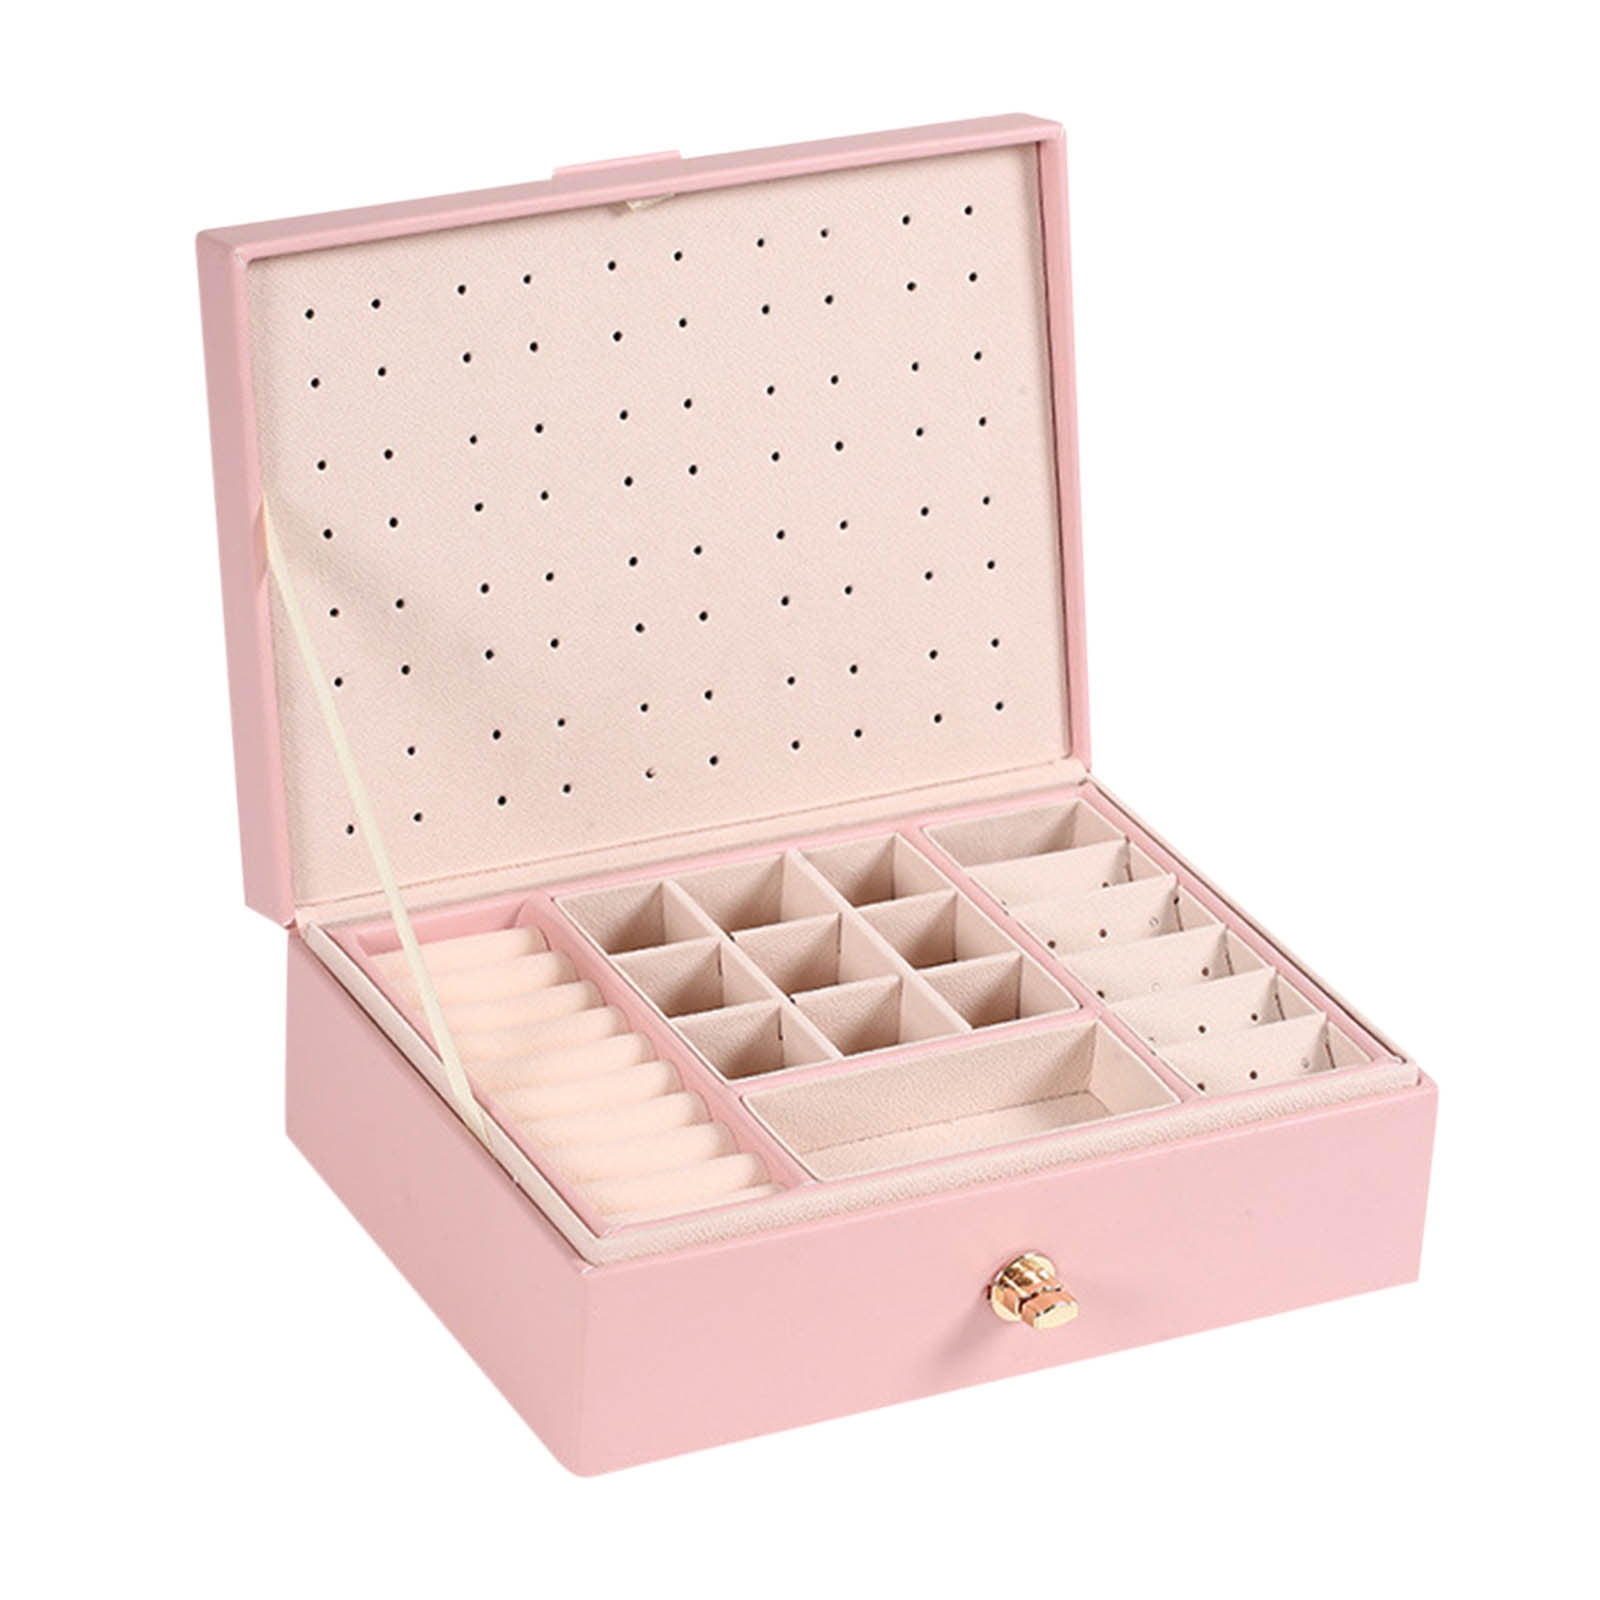 WQQZJJ Jewelry Box Jewelry Organizer Box Leather Large Jewelry Boxes  Earrings Holder Organizer Storage Case Double Layer Display With Removable  Tray Elegant Jewelry Box Jewelry Clearance on Deals 